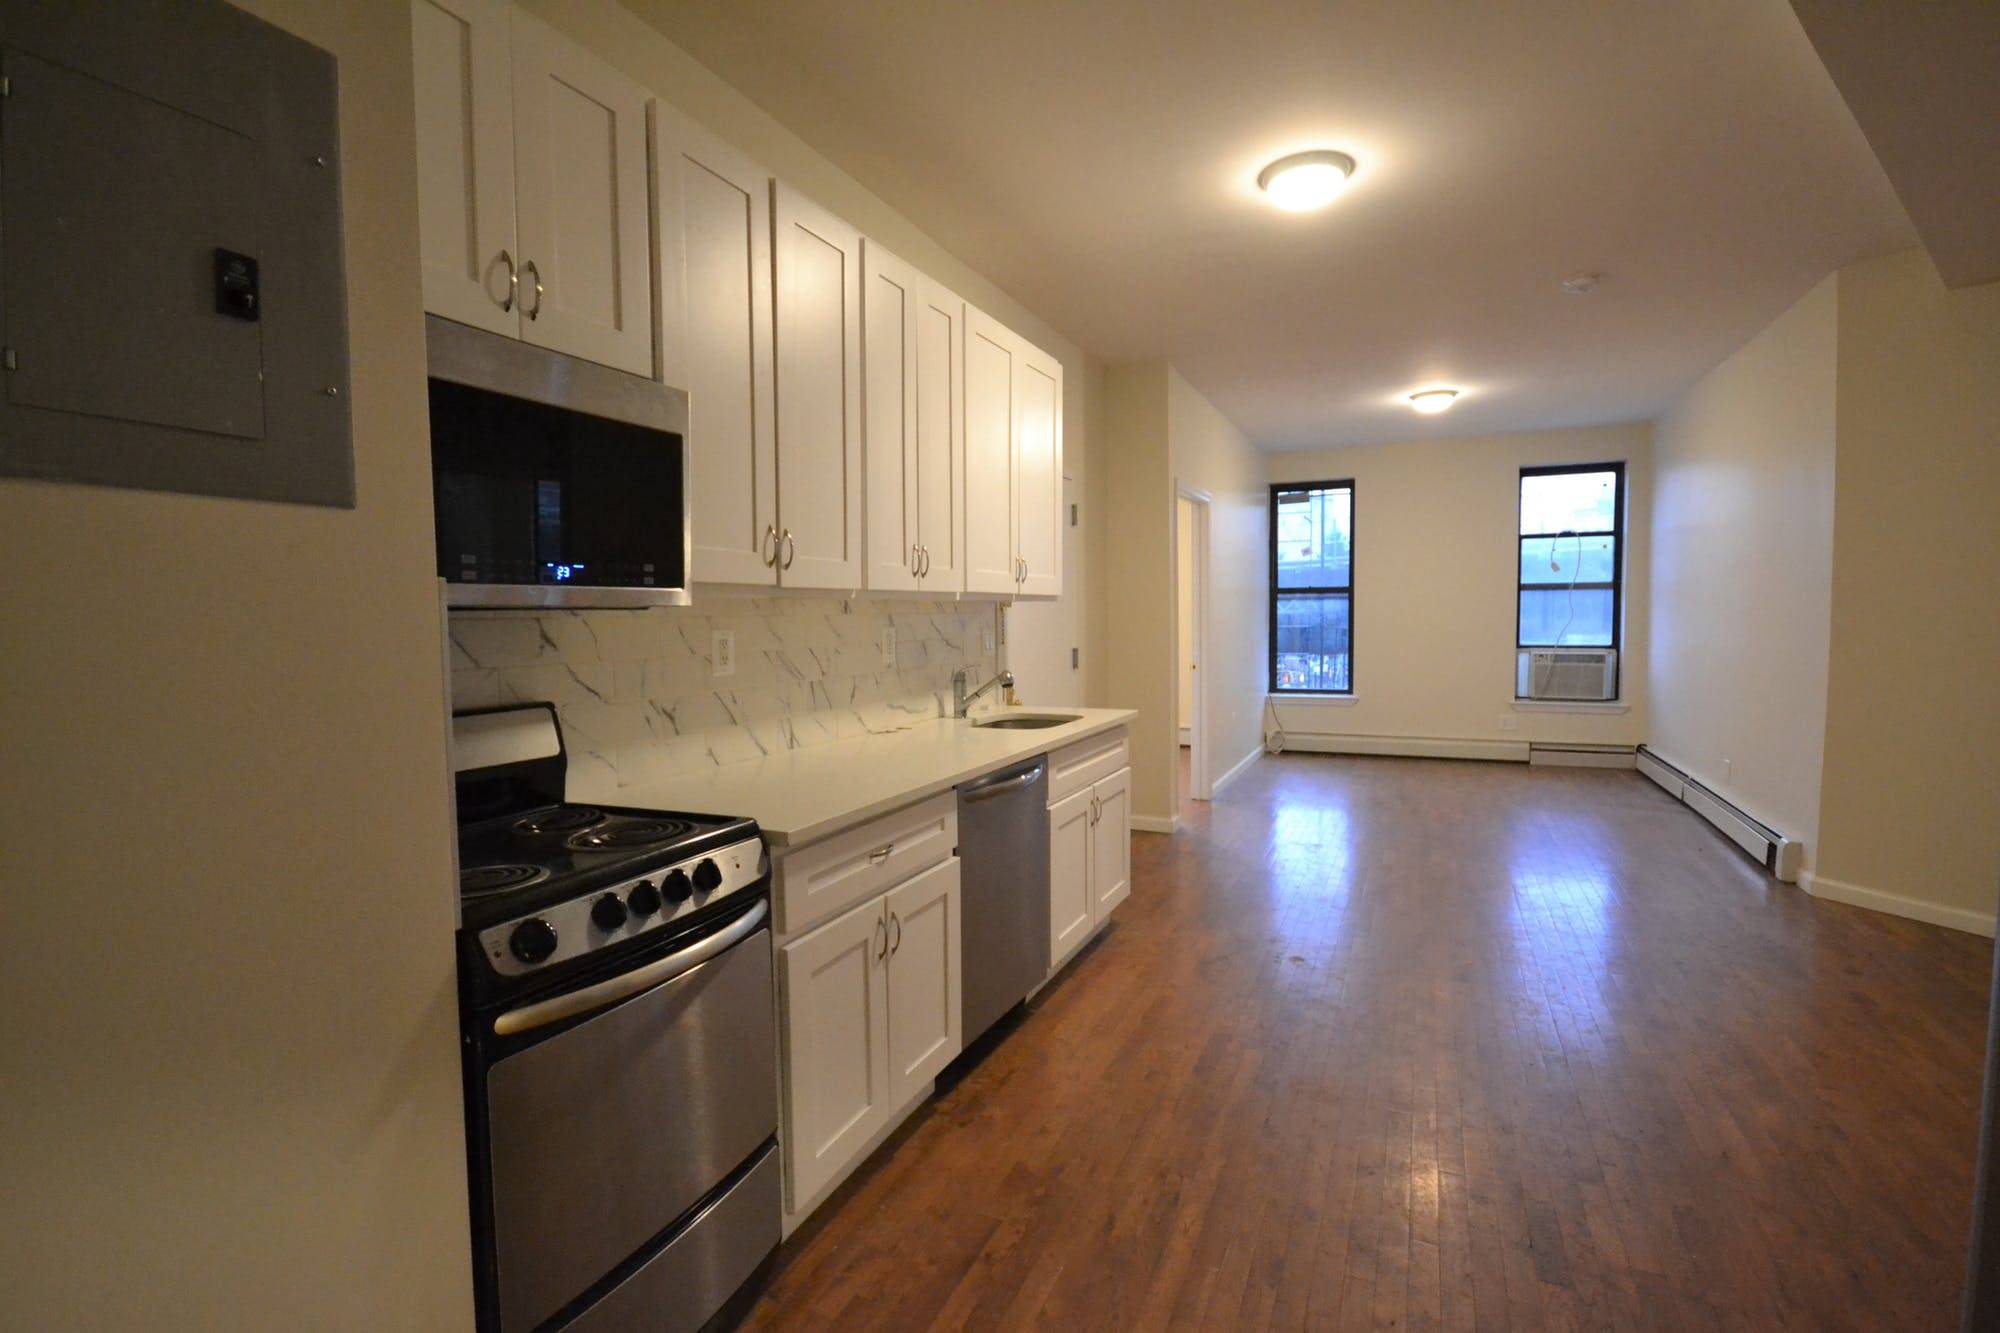 This incredible 4 bedroom Bed Stuy home offers stainless steel kitchen appliances, including a dishwasher and microwave.